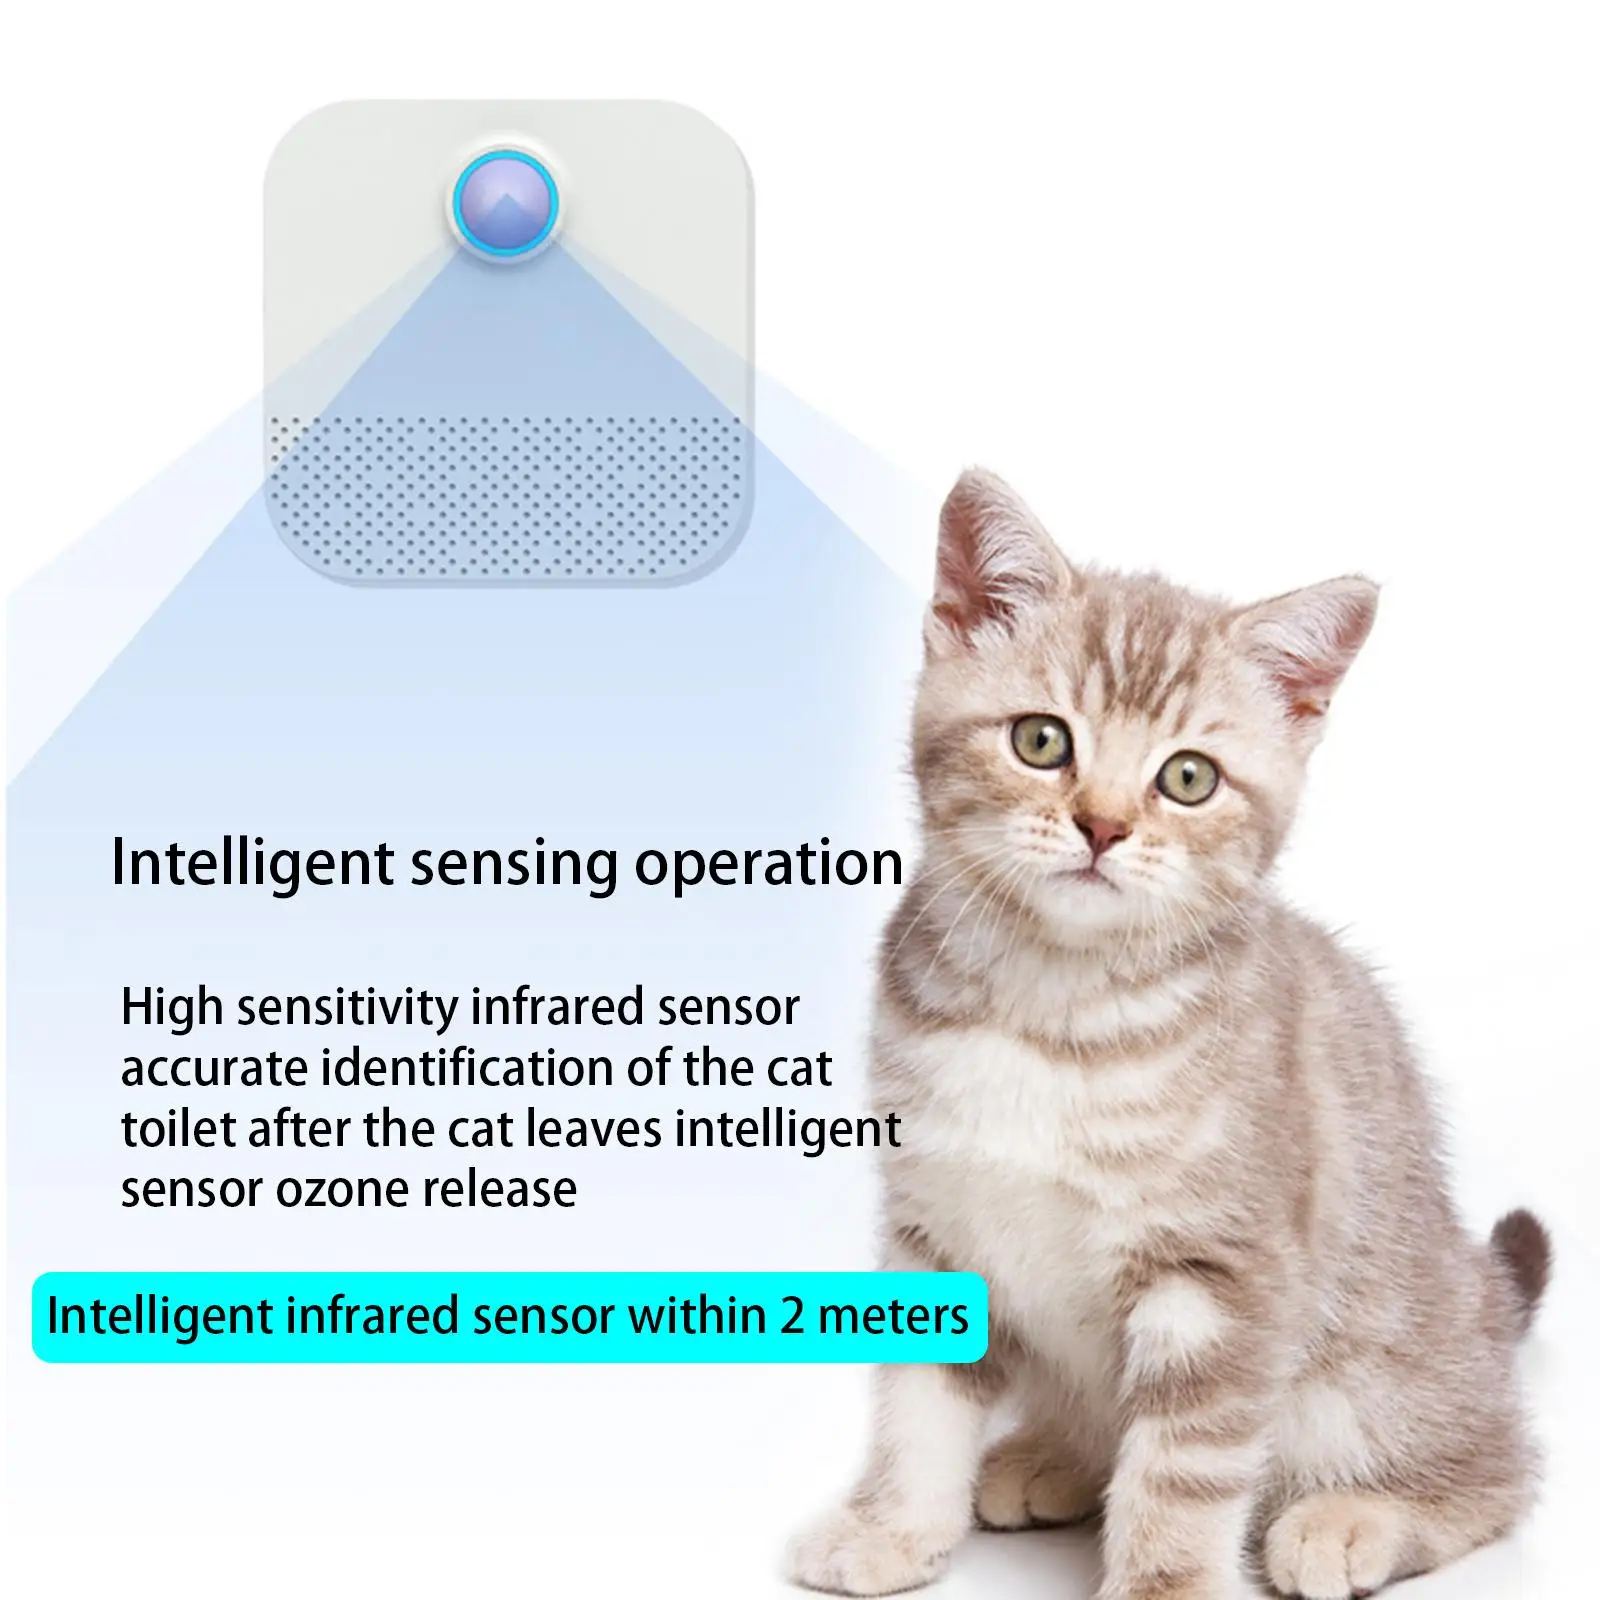 Cat Litter Deodorization with Sensor Unscented for Bathroom Toilet